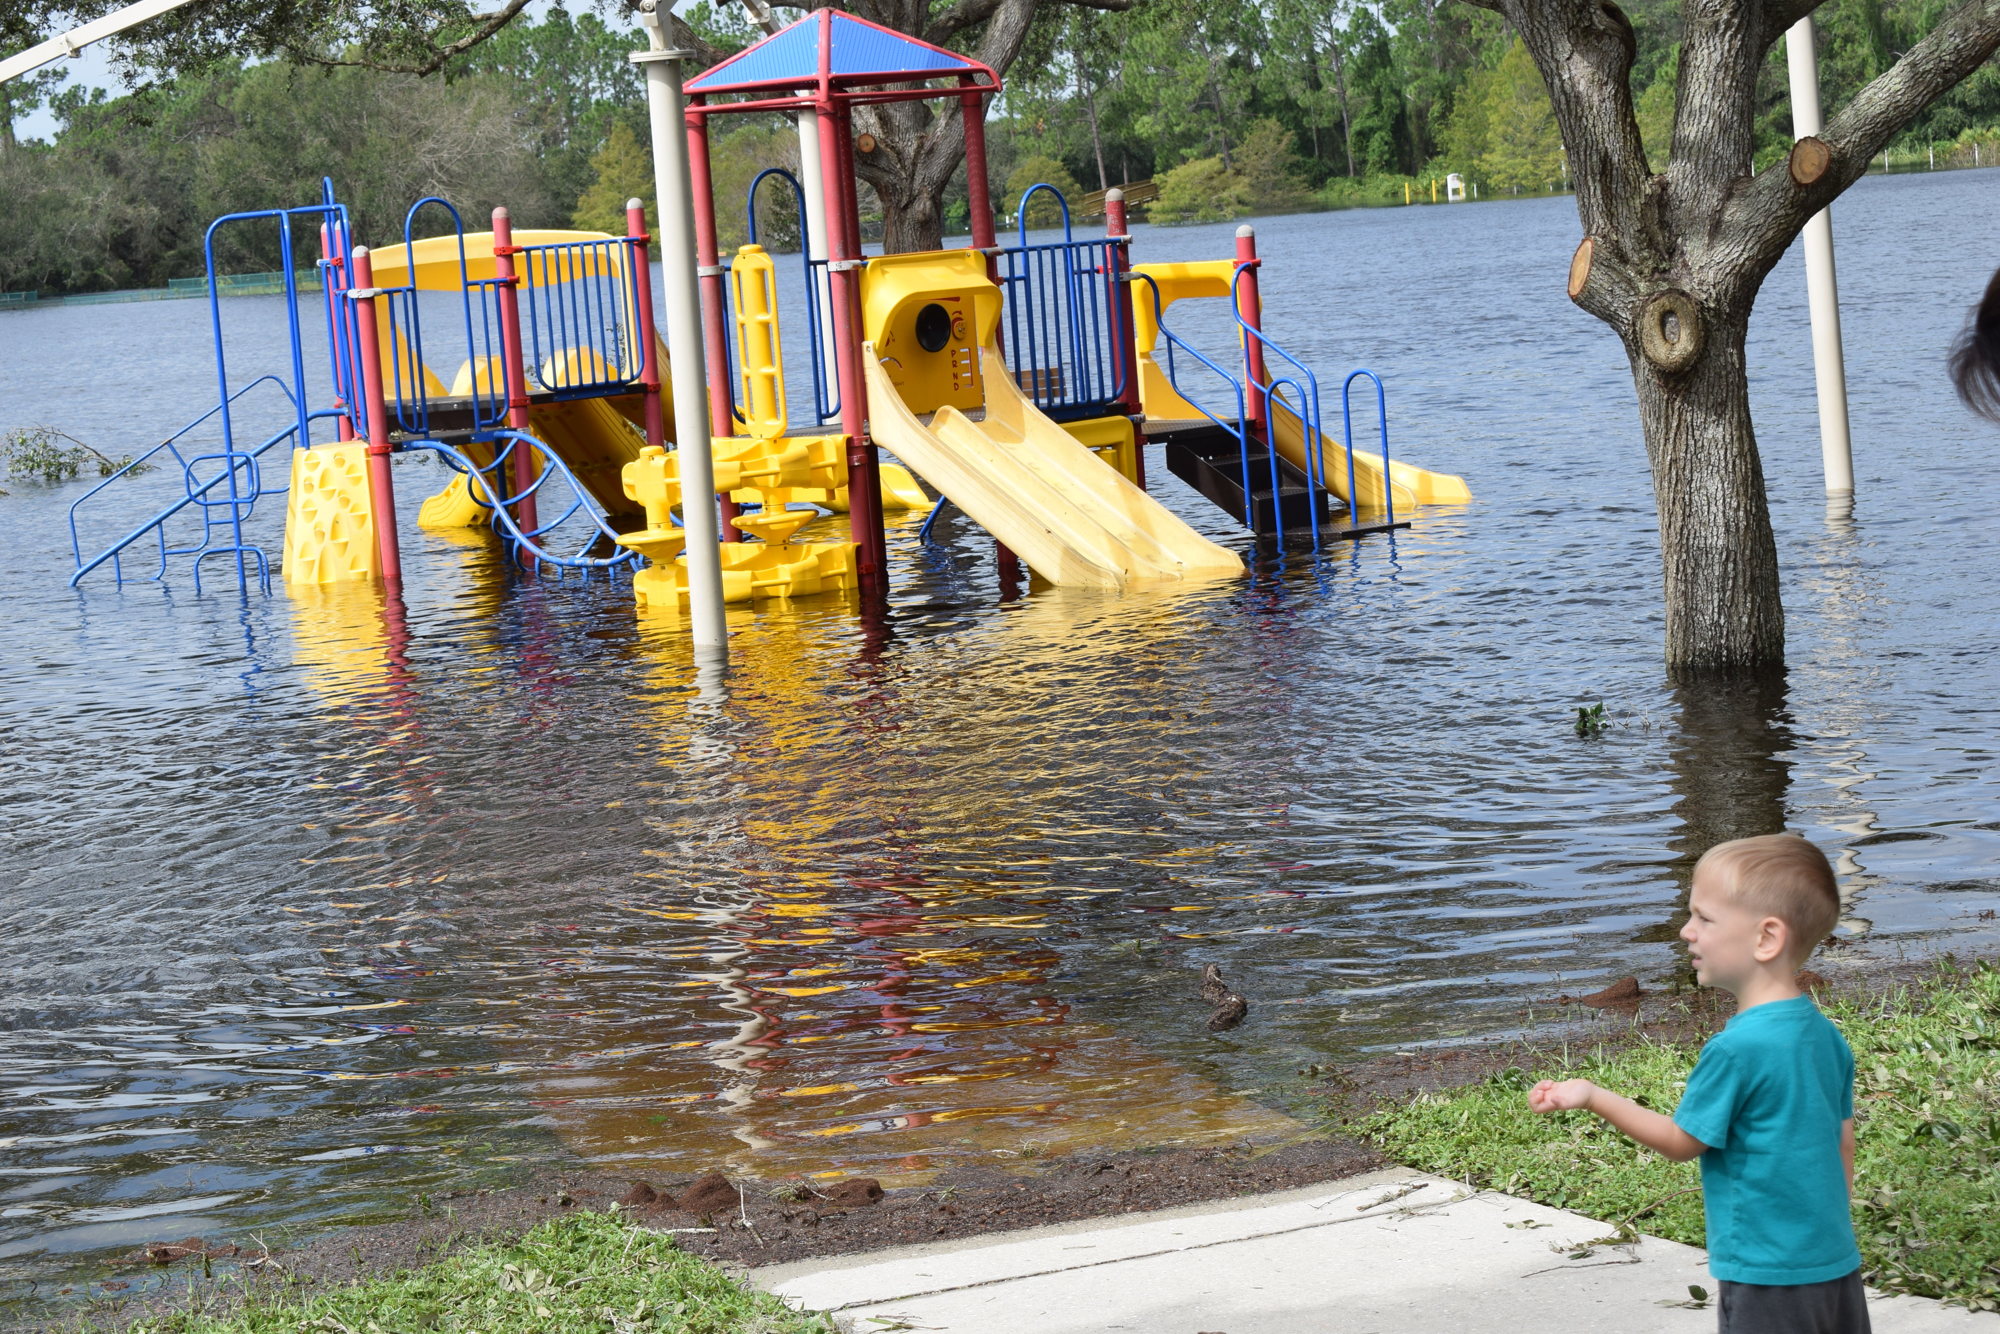 Summerfield 3-year-old Carson Sirek wonders how he is going to get to the playground equipment at flooded Greenbrook Adventure Park in Lakewood Ranch in the wake of Hurricane Ian. (Photo by Jay Heater)